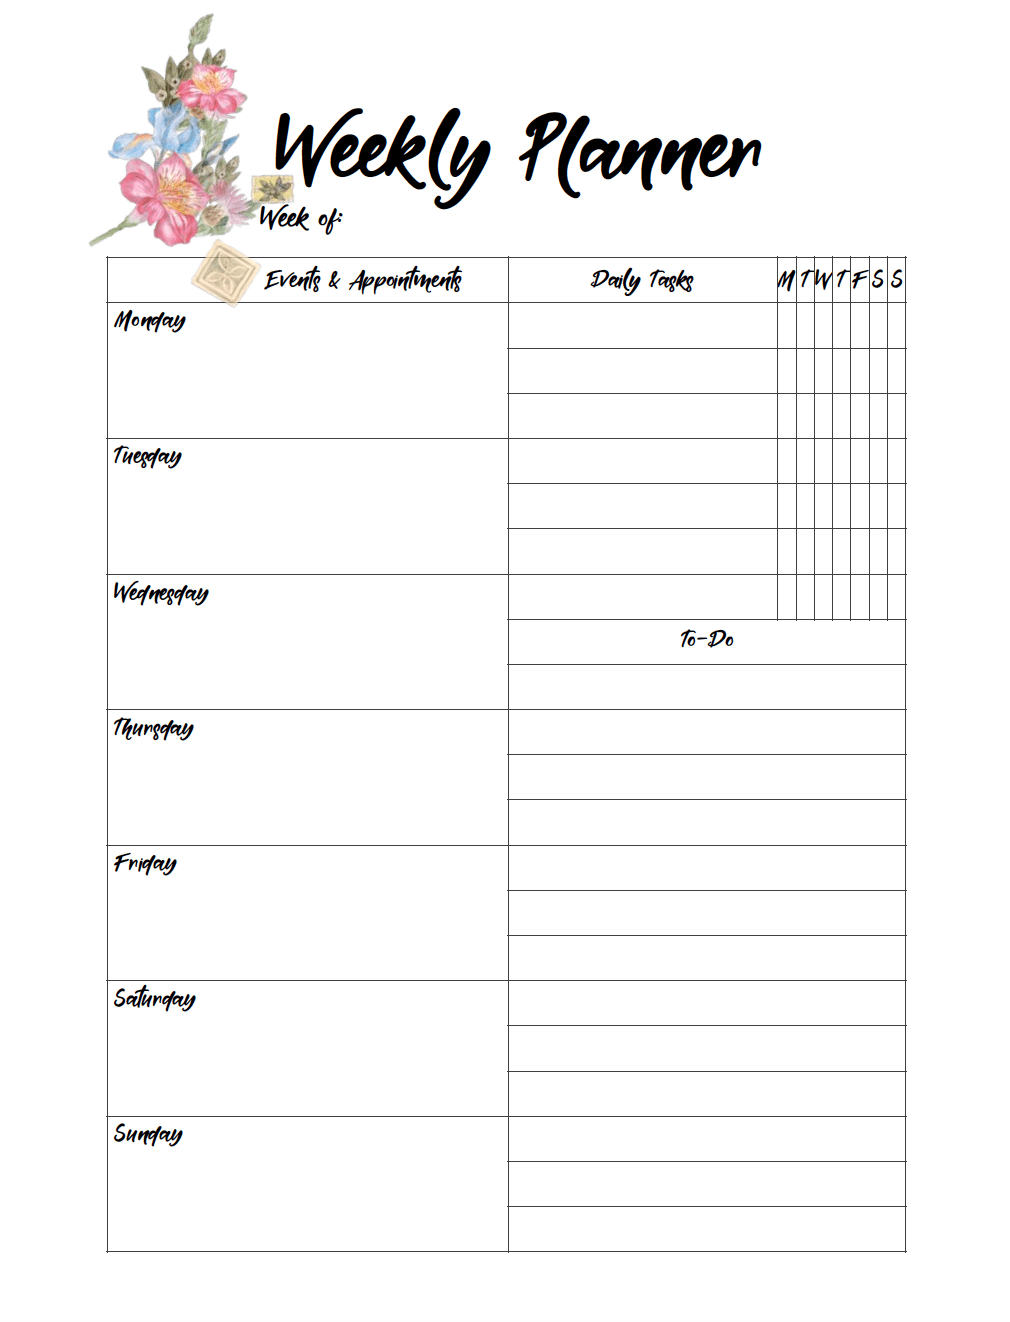 Free Printable Weekly Planners: Monday Start in Monday To Friday Planner